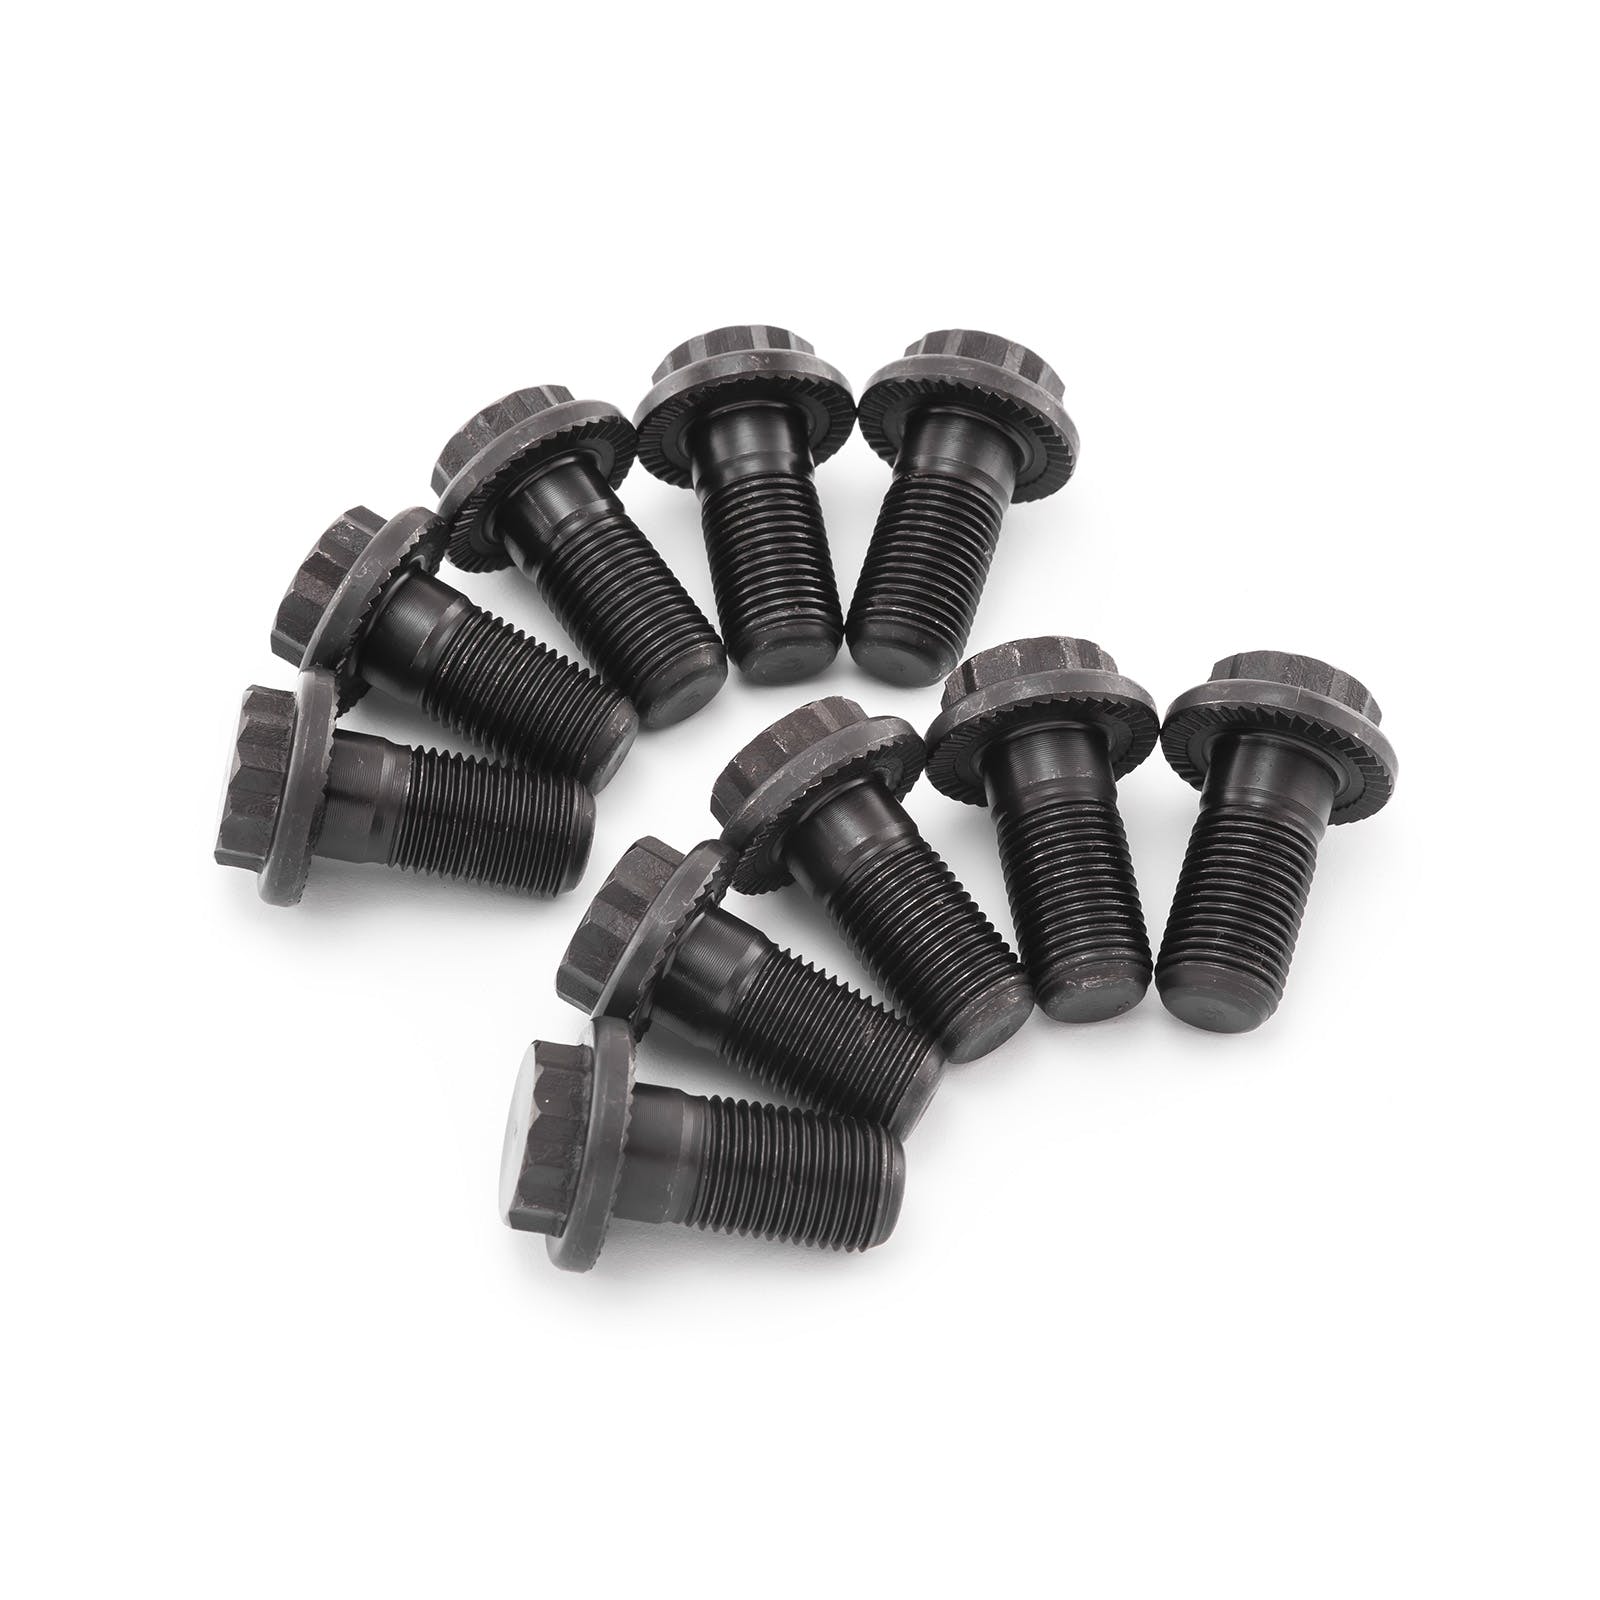 Speedmaster PCE462.1018 9.5 and 10 Ring Gear Bolts 12 Point 1/2-20 (set of 10)